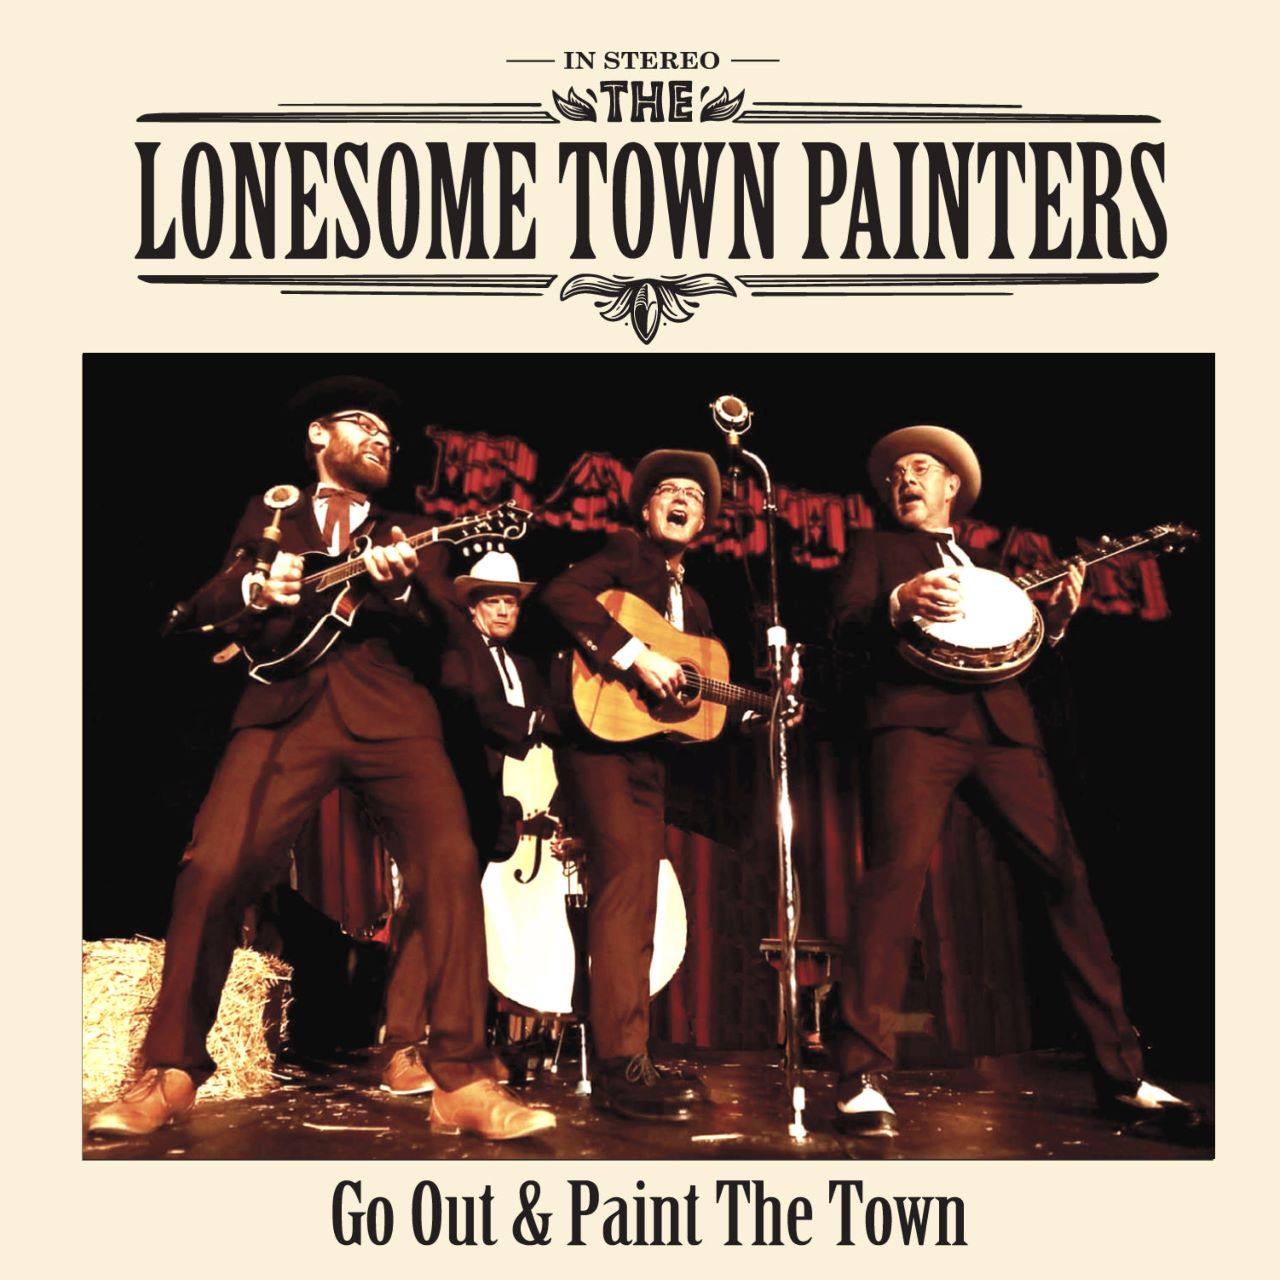 Lonesome Town Painters - Go Out & Paint The Town cover album